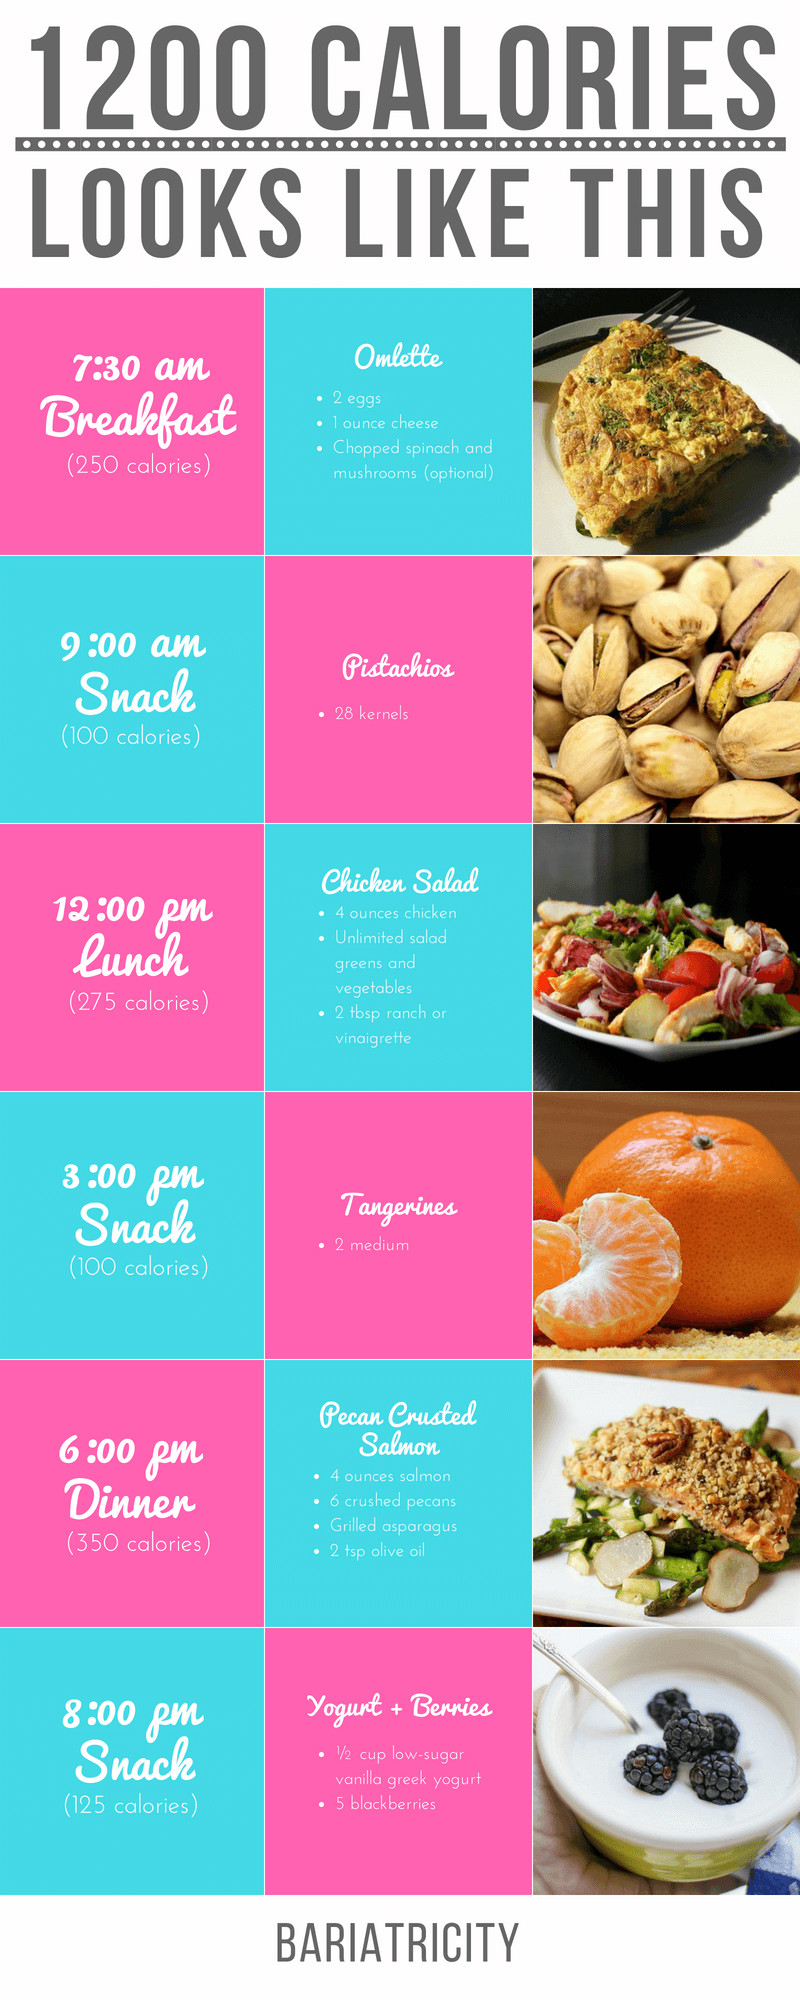 Low Calorie Diet Plan Meal Planner
 1 200 Calories Looks Like This [Diet and Meal Plan